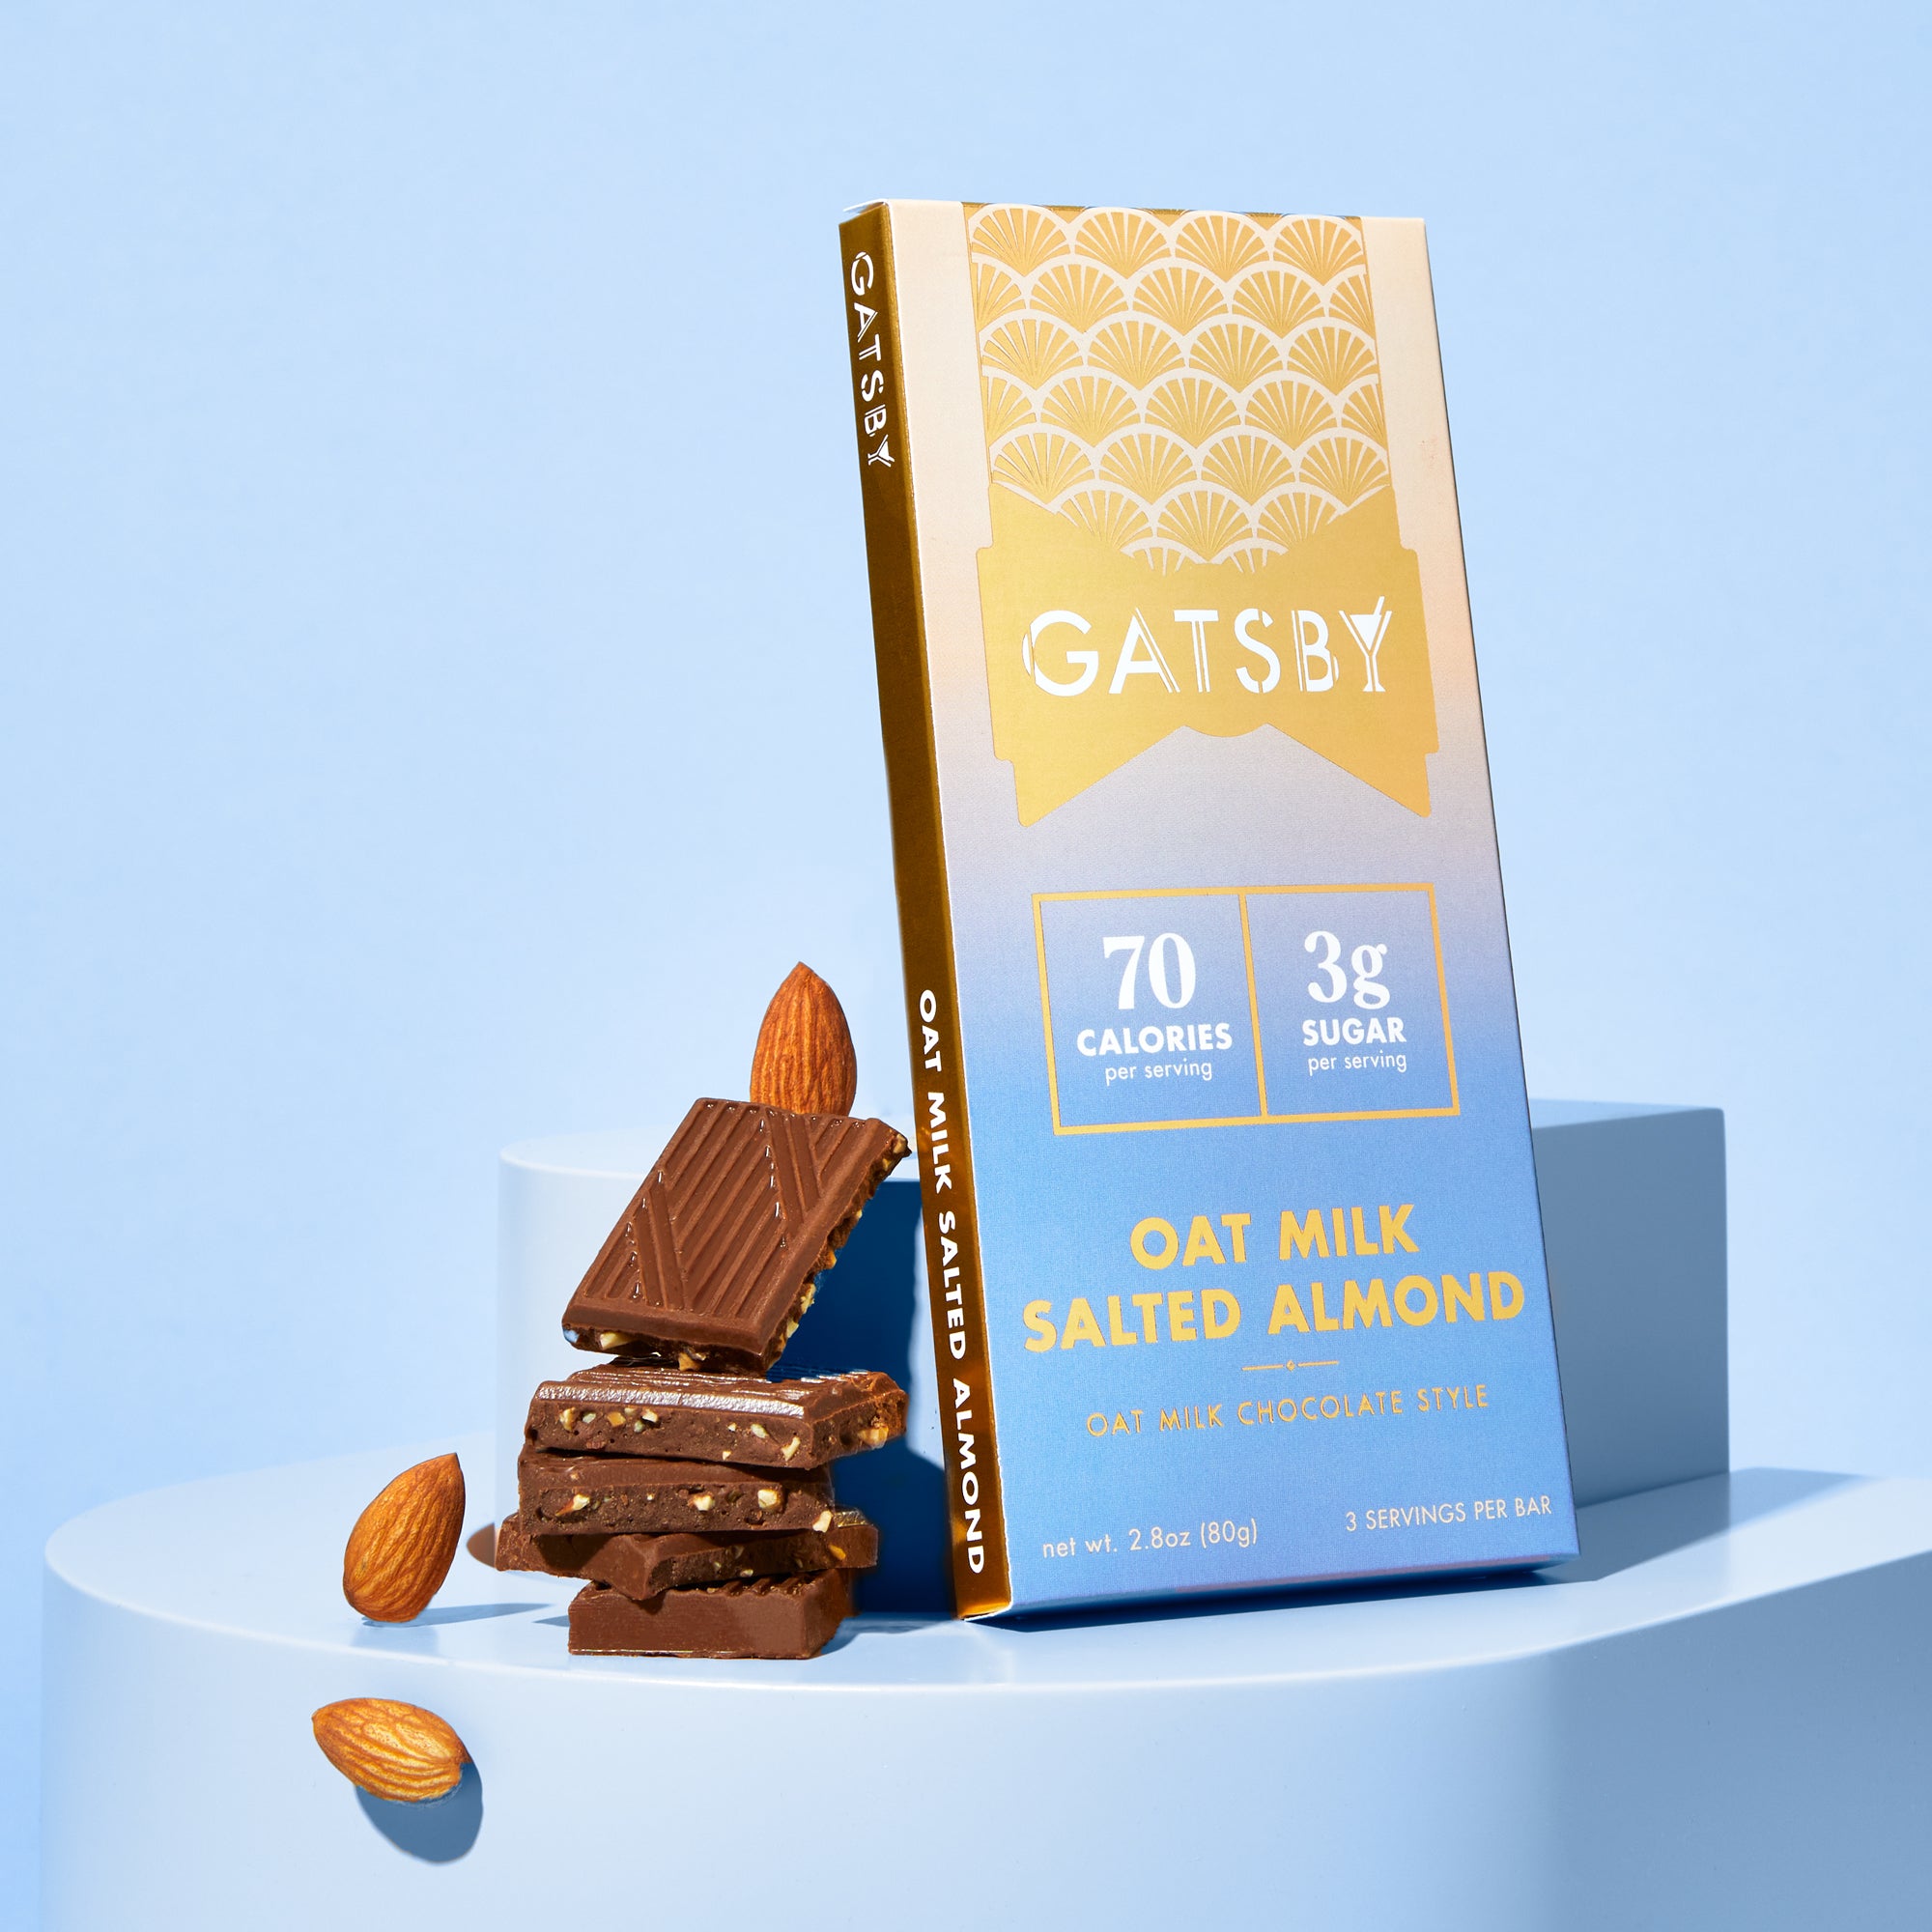 GATSBY Review +TRY GATSBY Chocolate 50% OFF - Dear Creatives